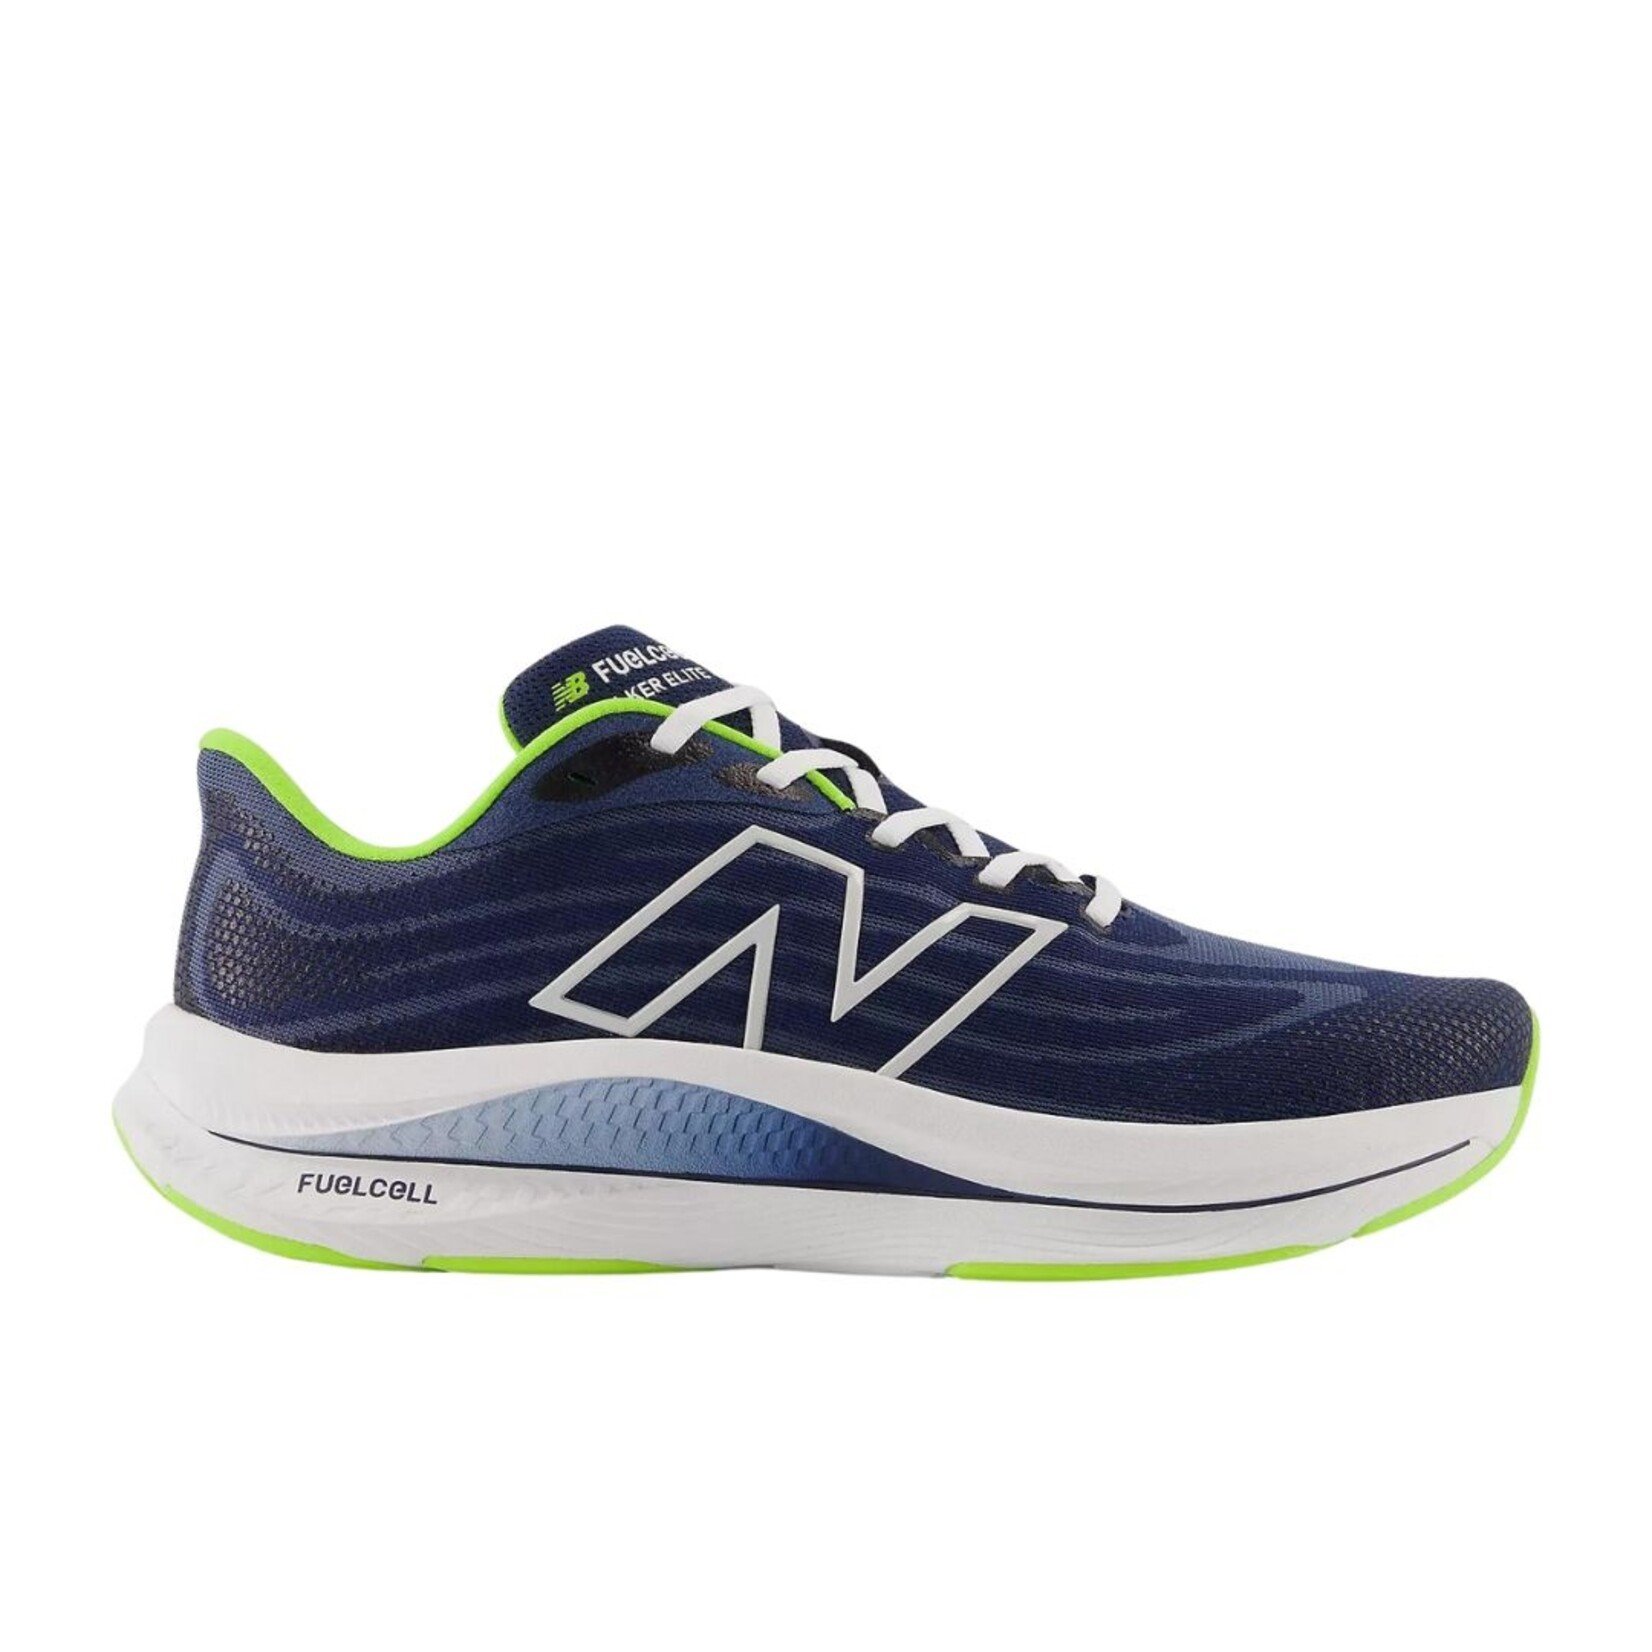 New Balance New Balance MWWKEL Fuel Cell Elite Men’s Walking Shoes